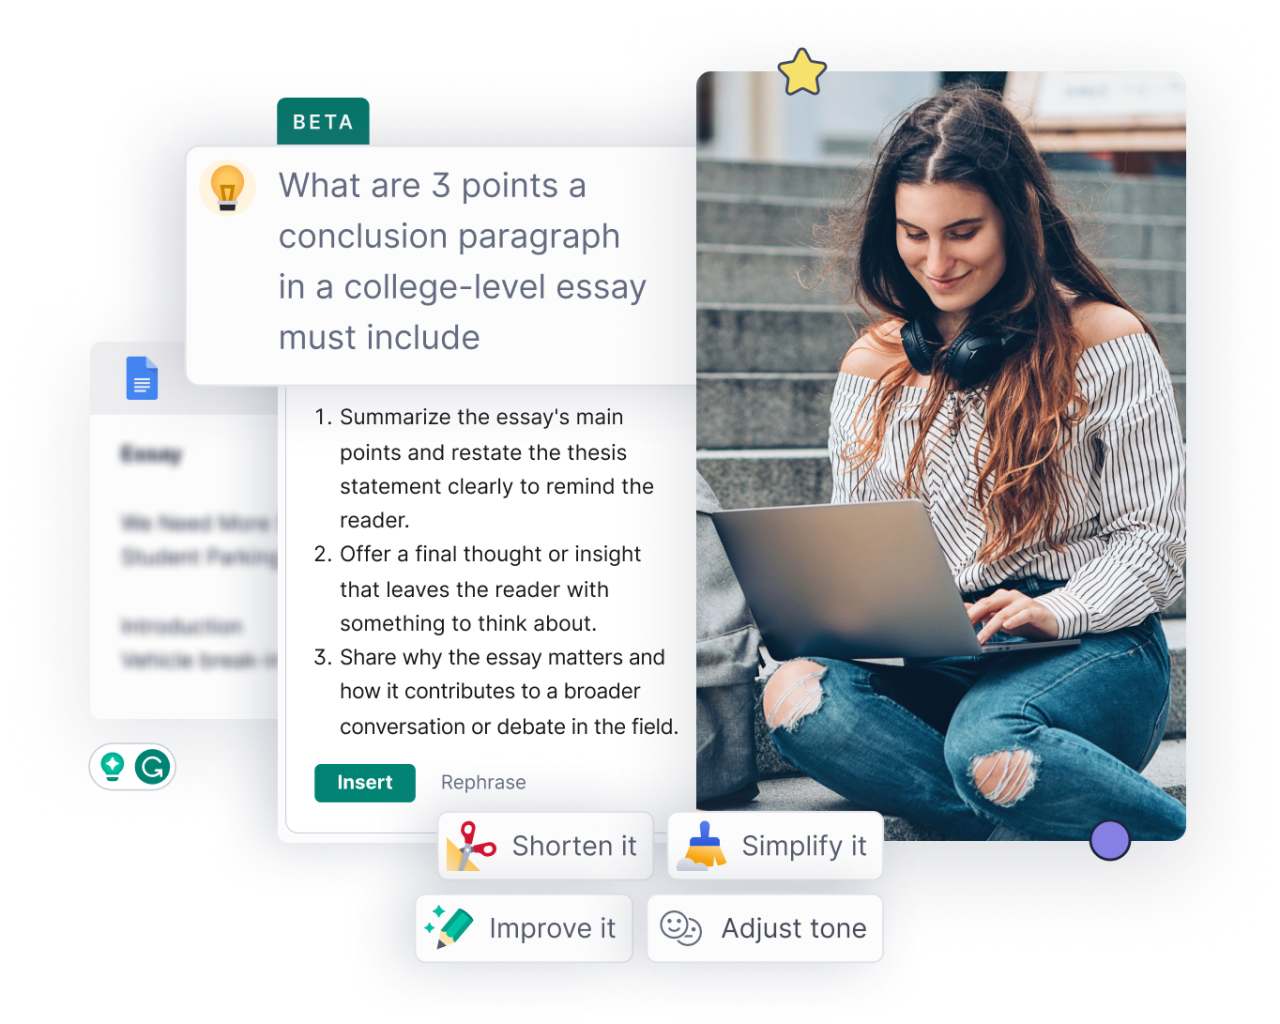 grammarly students free